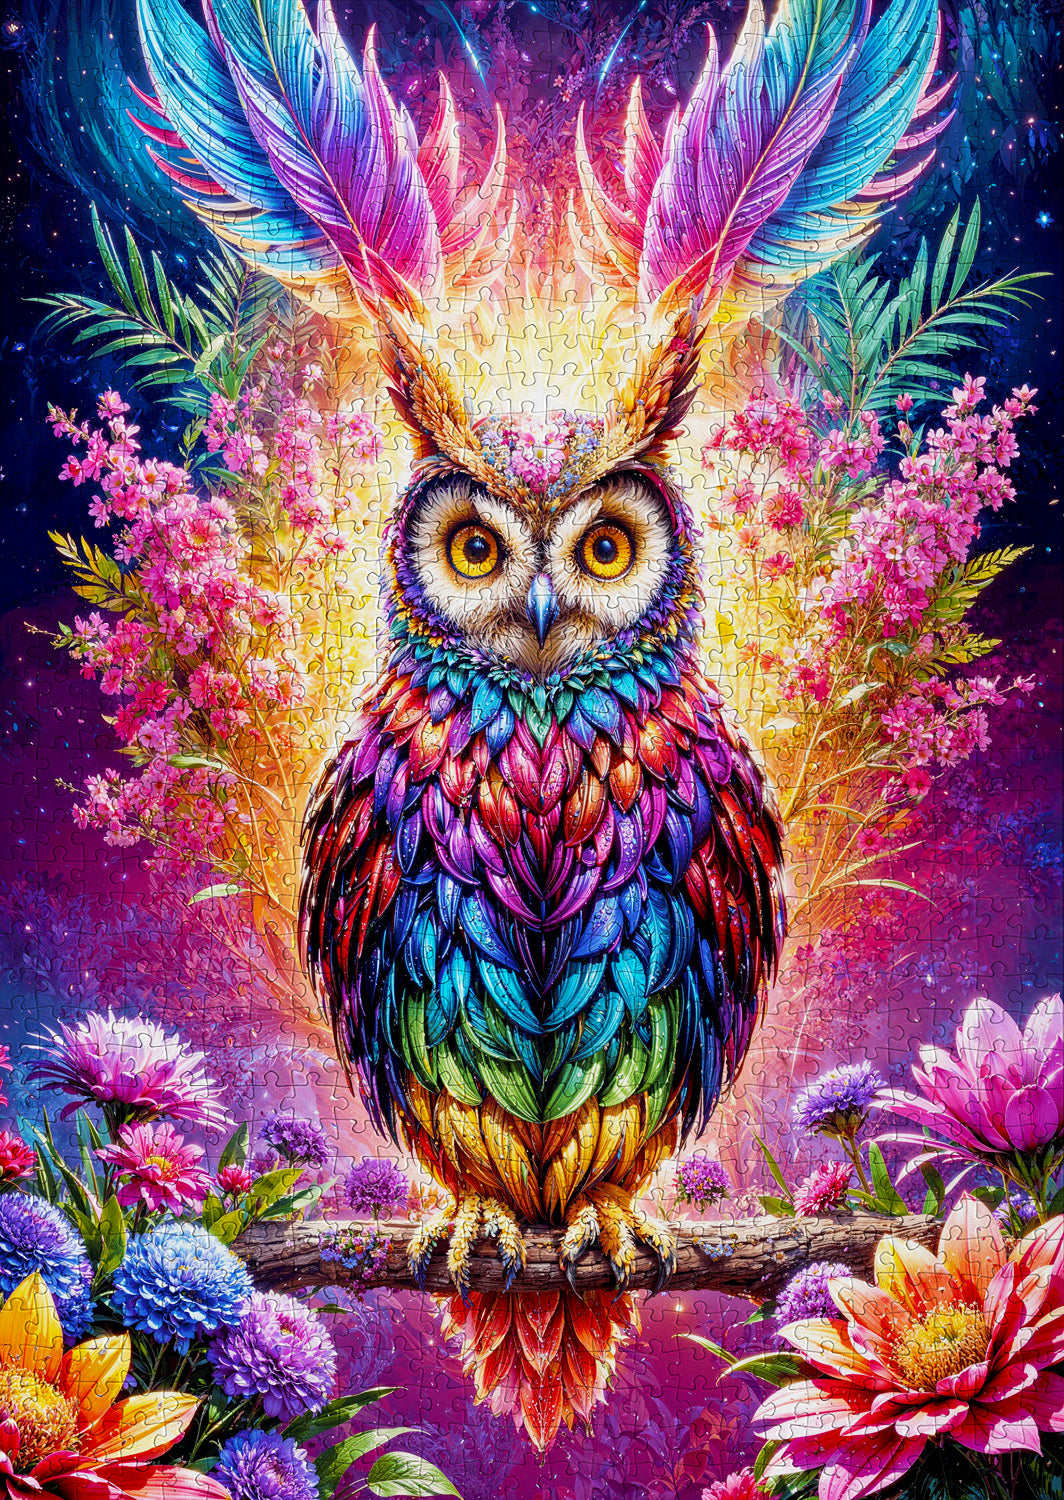 1000 Pieces Jigsaw Puzzle - Neon Owl (2161)